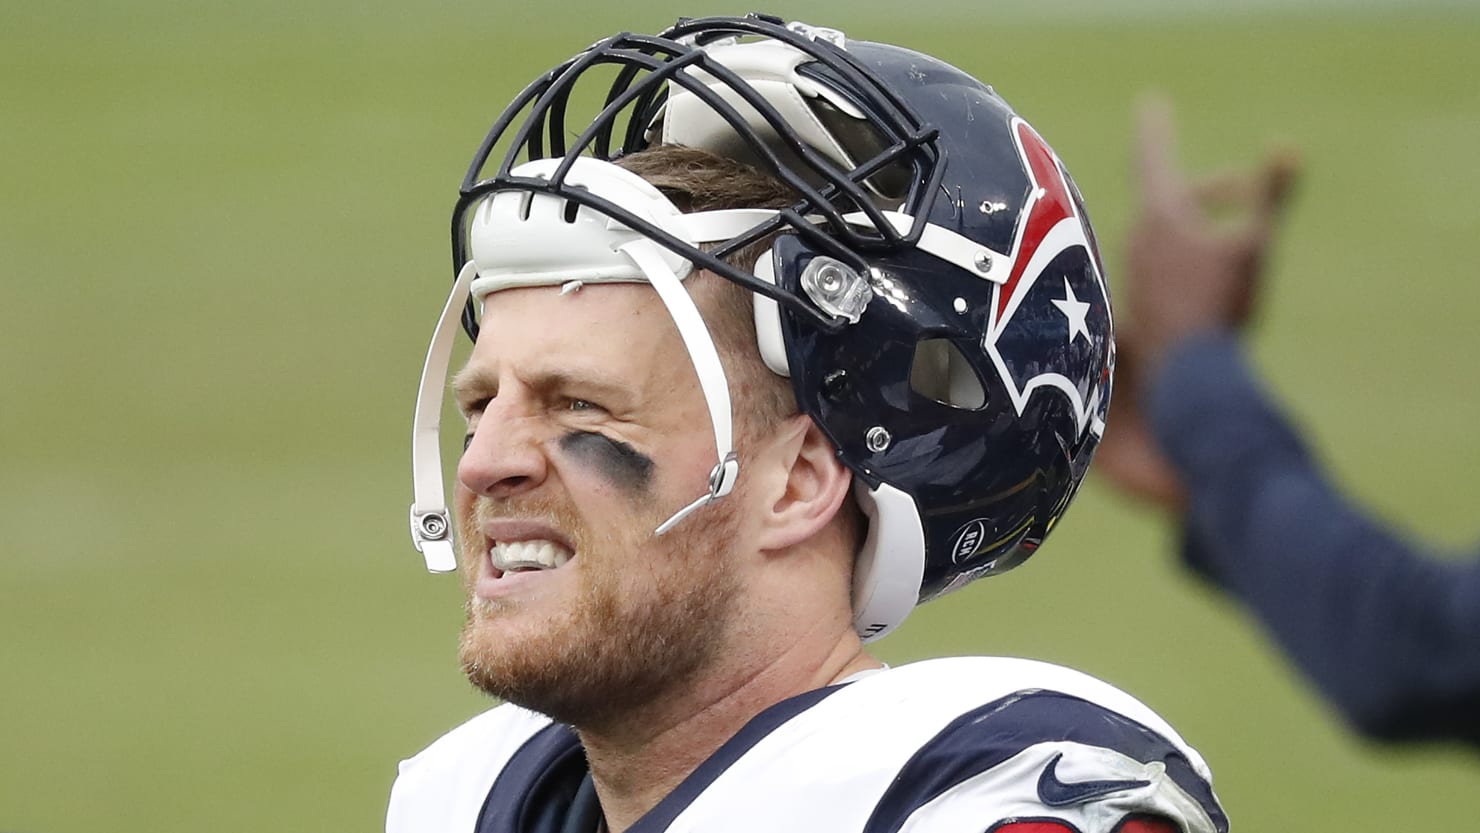 J.J. Watt offers to pay for funeral of a fan's grandfather